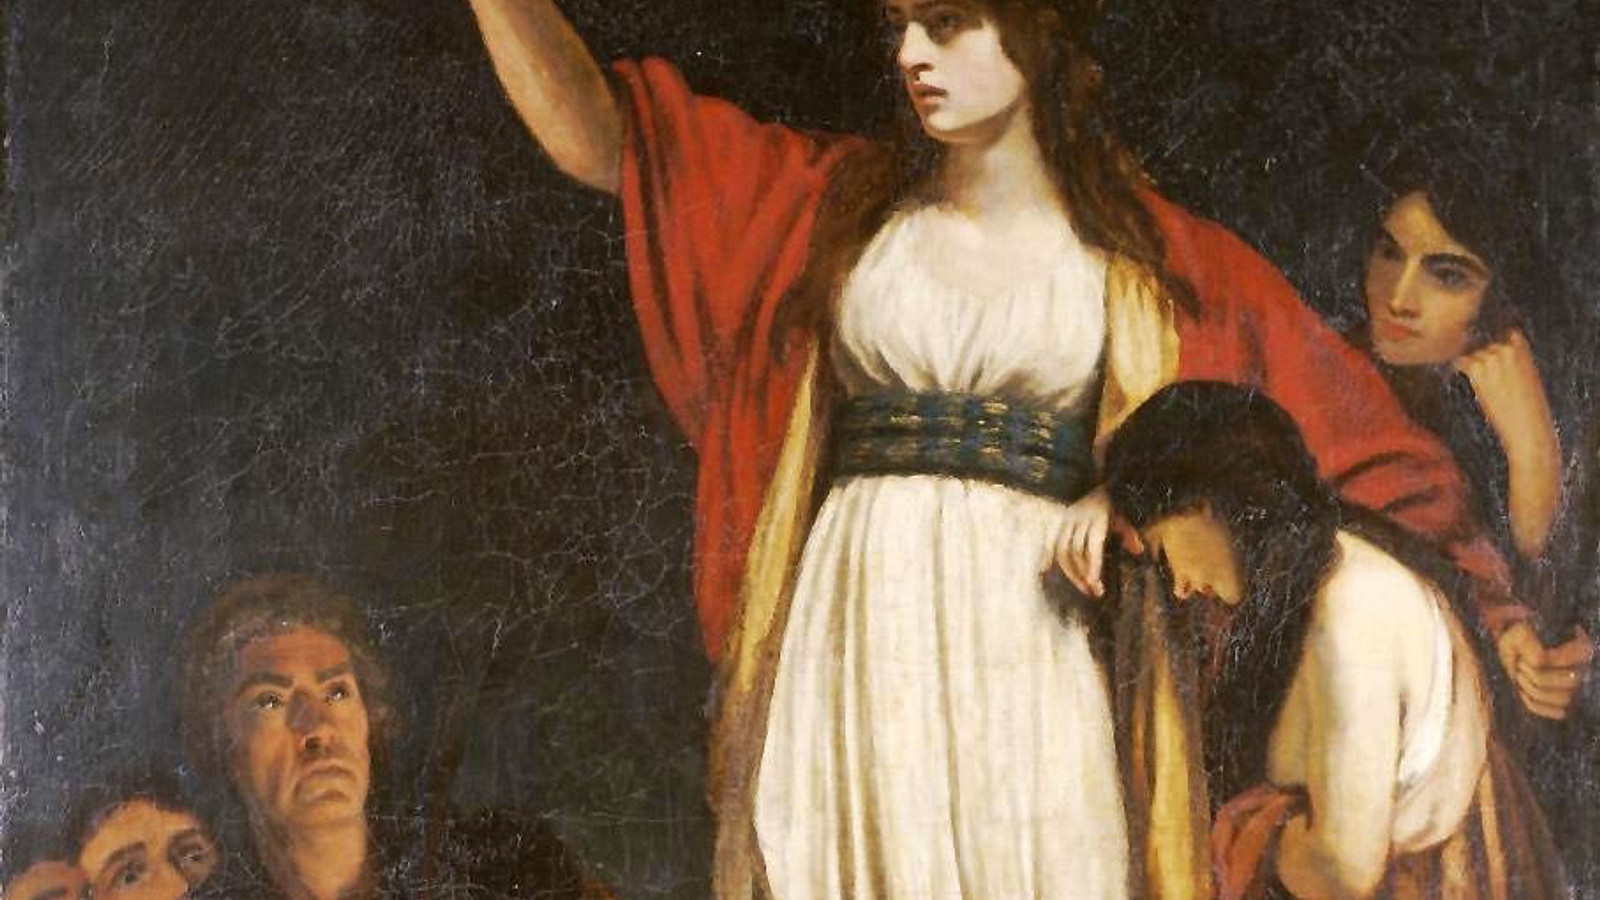 The Iceni's Queen Boudicca Who Revolted Against Roman Rule, MessageToEagle.com